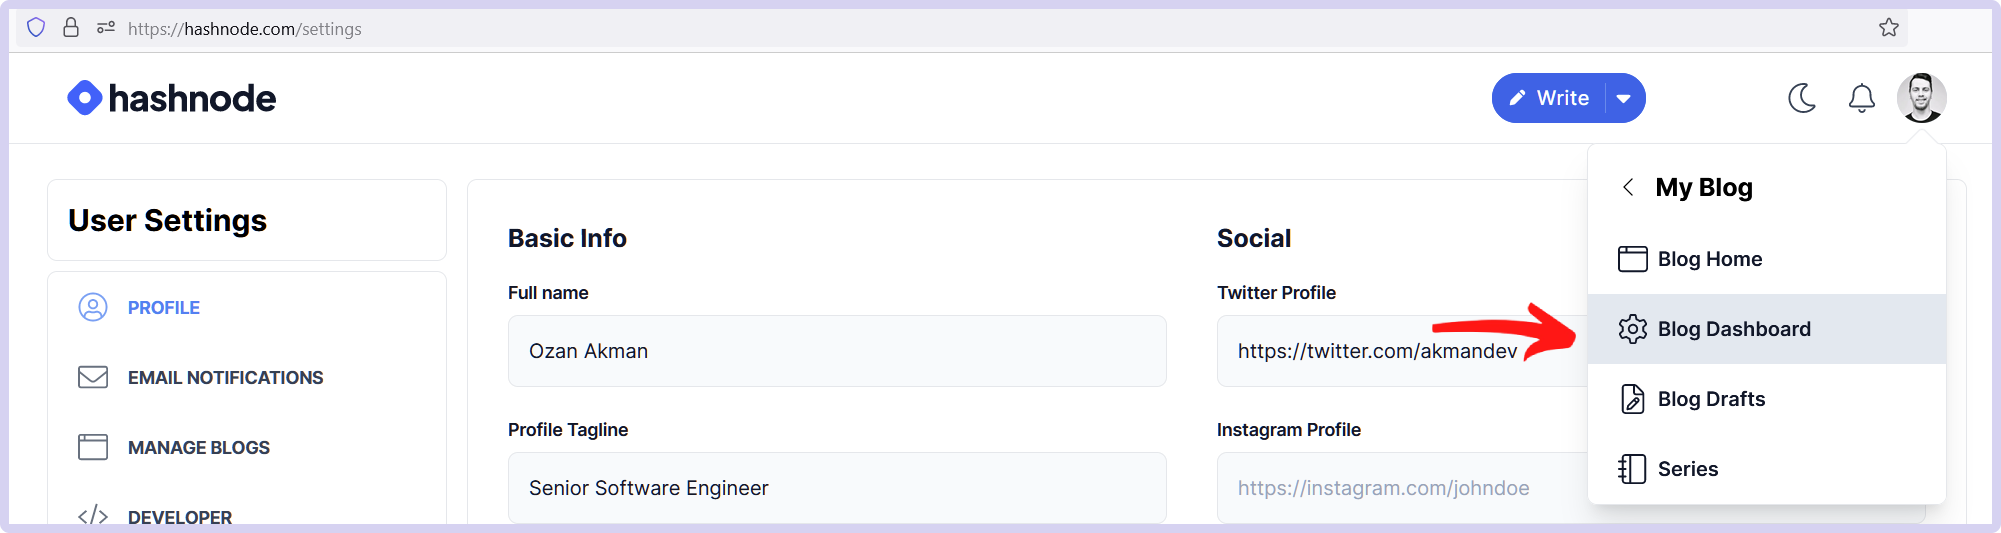 A screenshot of a user settings page on the Hashnode website, displaying sections for profile, basic info, social media links, and blog management options.